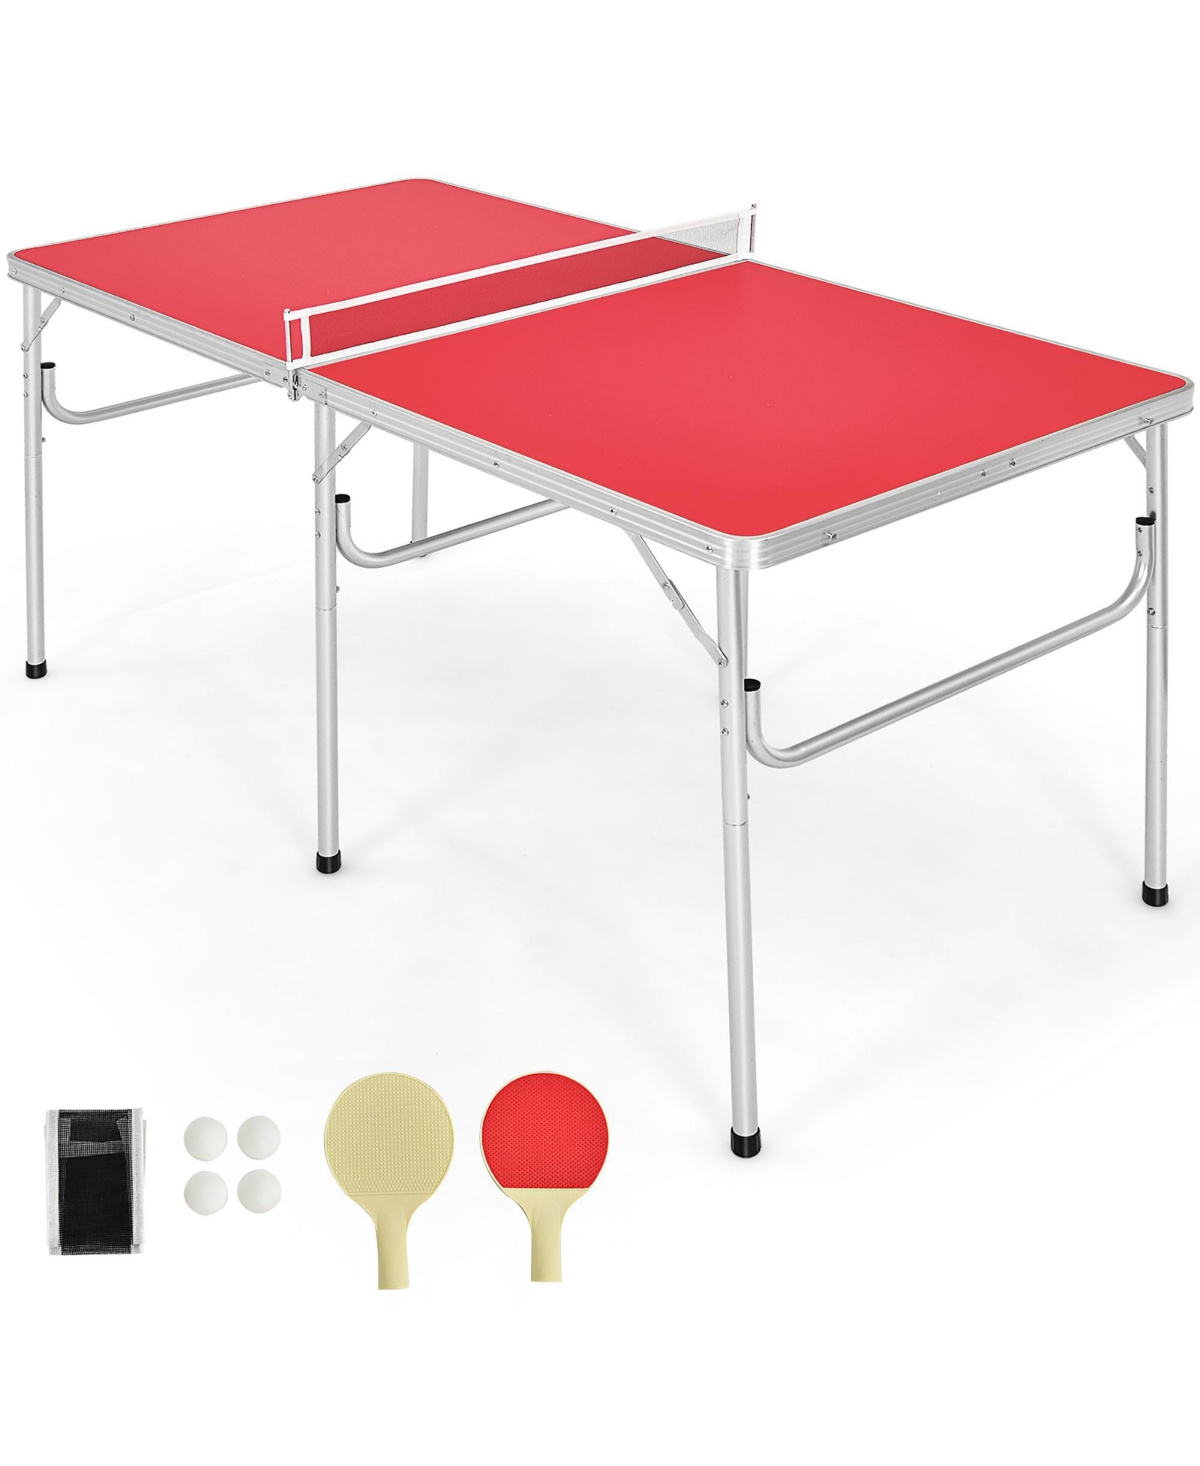 60'' Portable Table Tennis Ping Pong Folding Table - Red